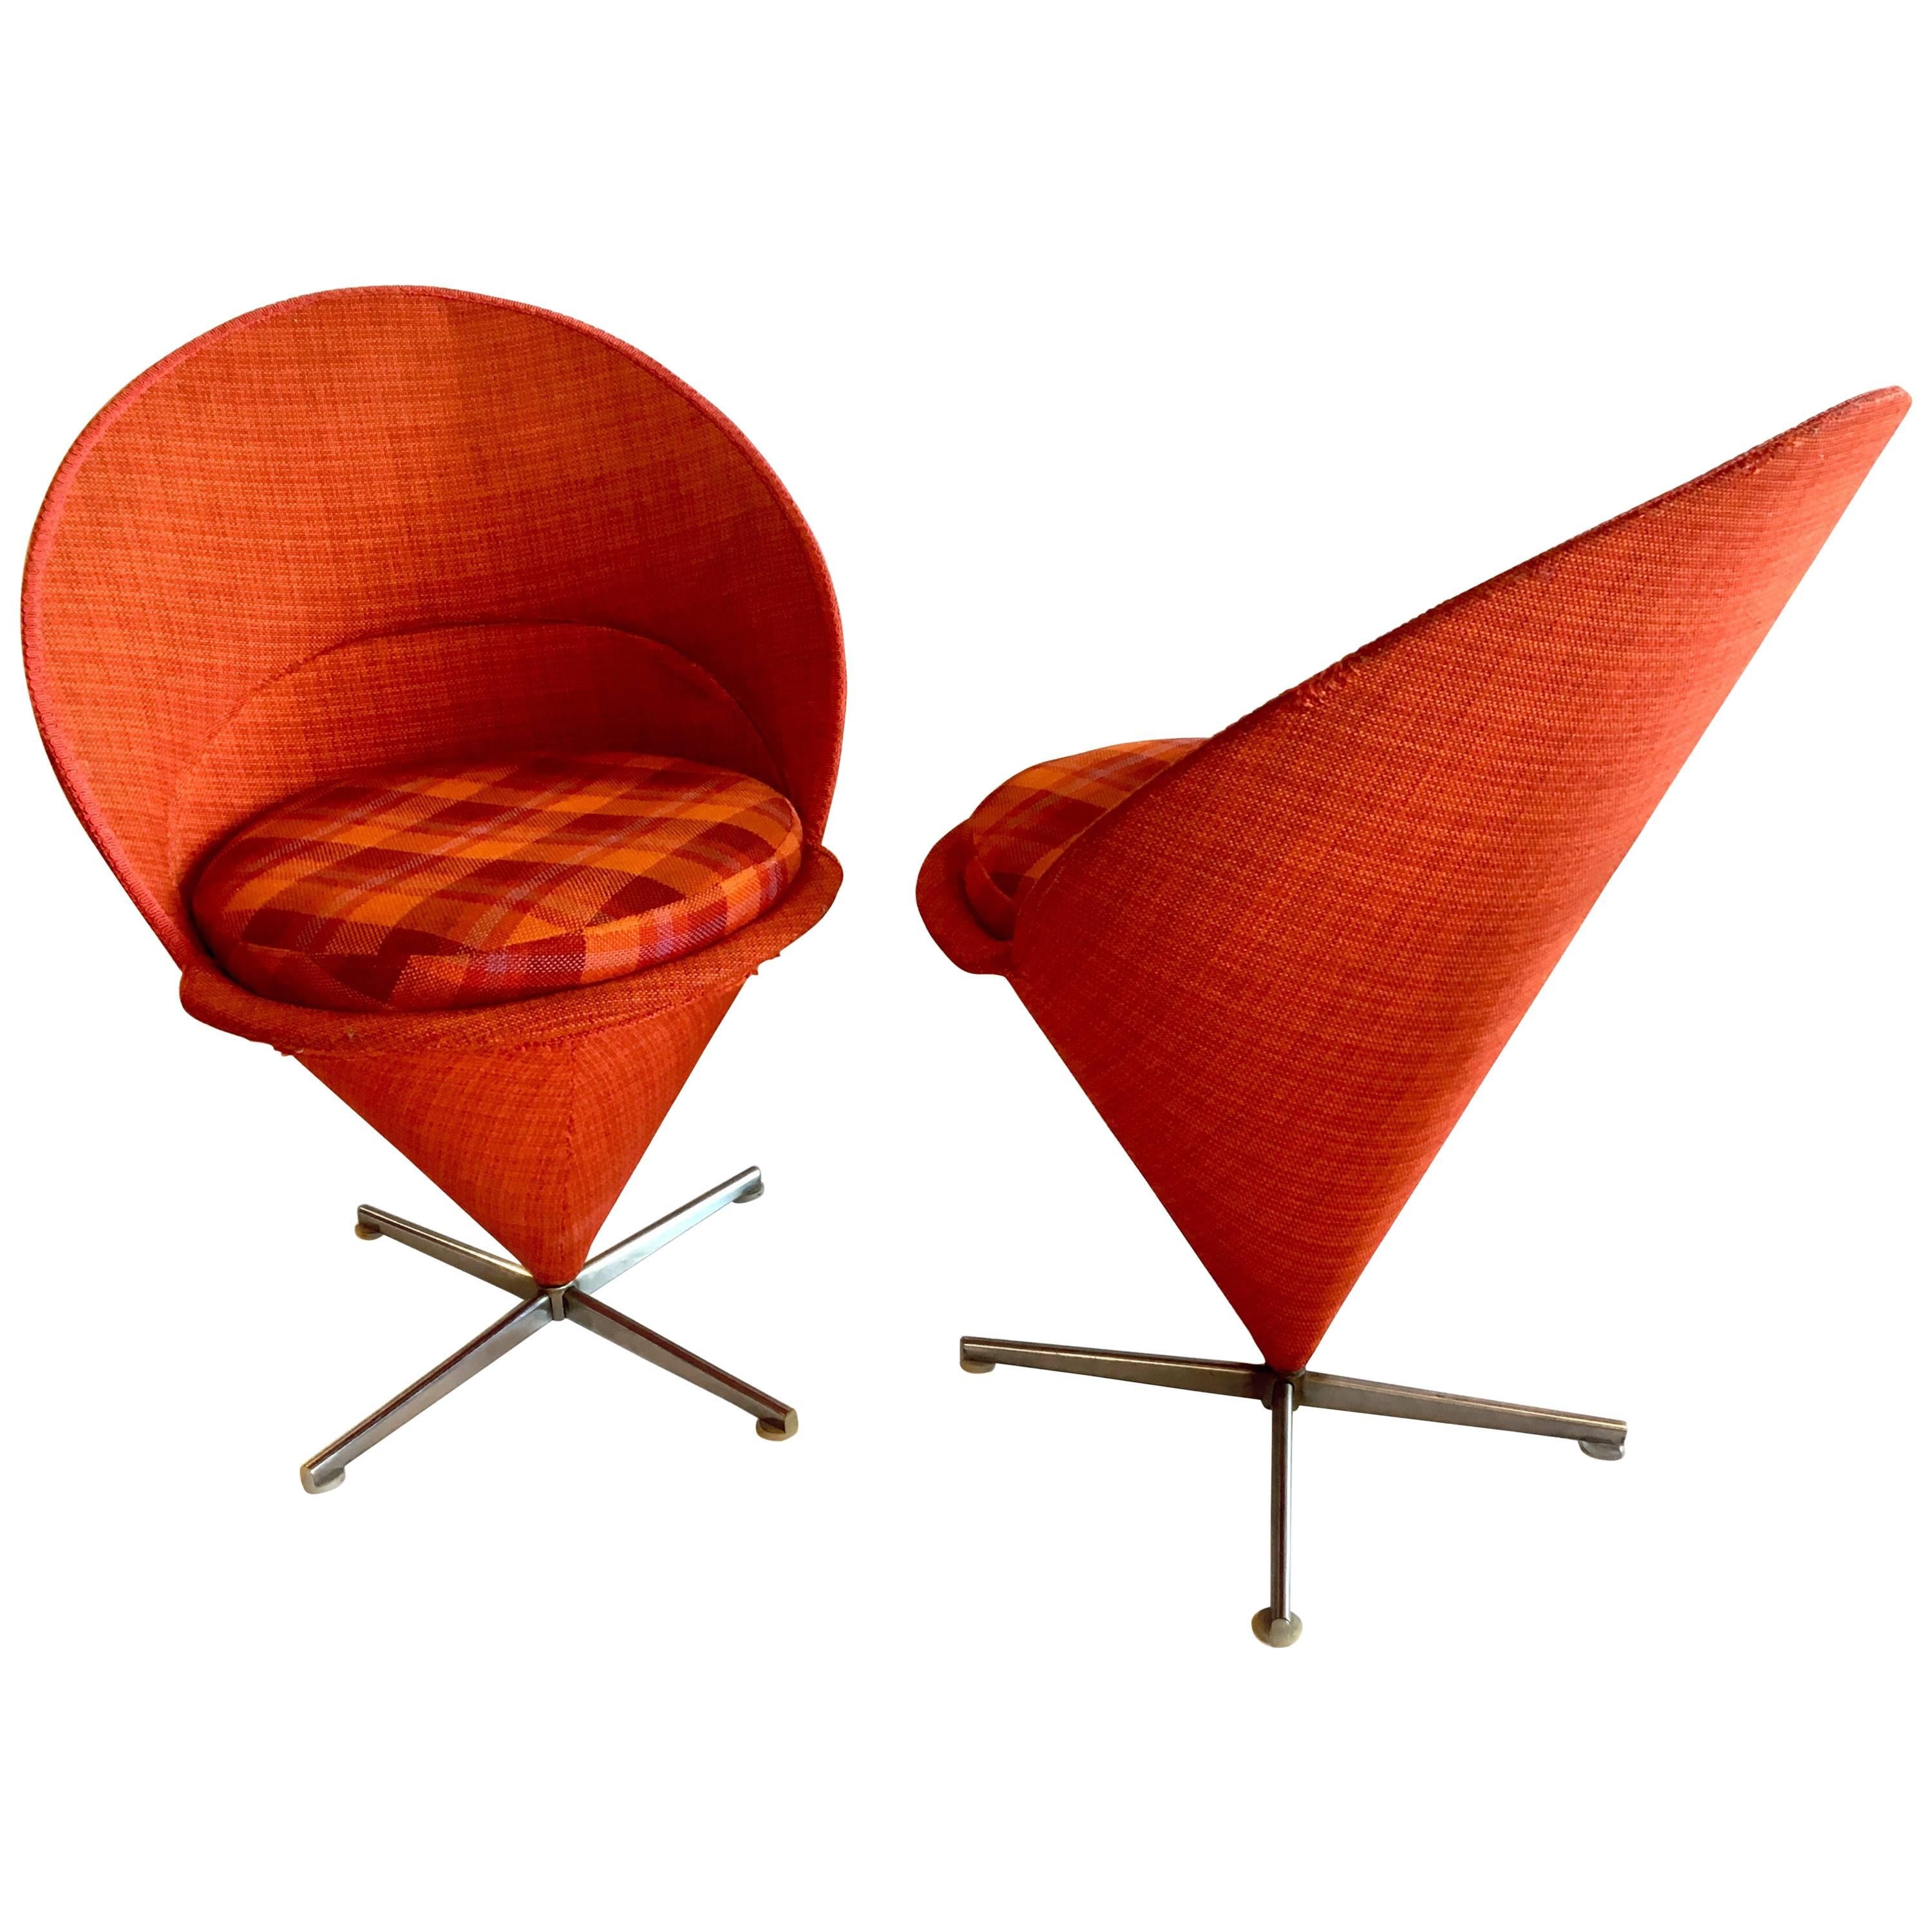 Incredible Pair of Early Production Cone Chairs by Verner Panton